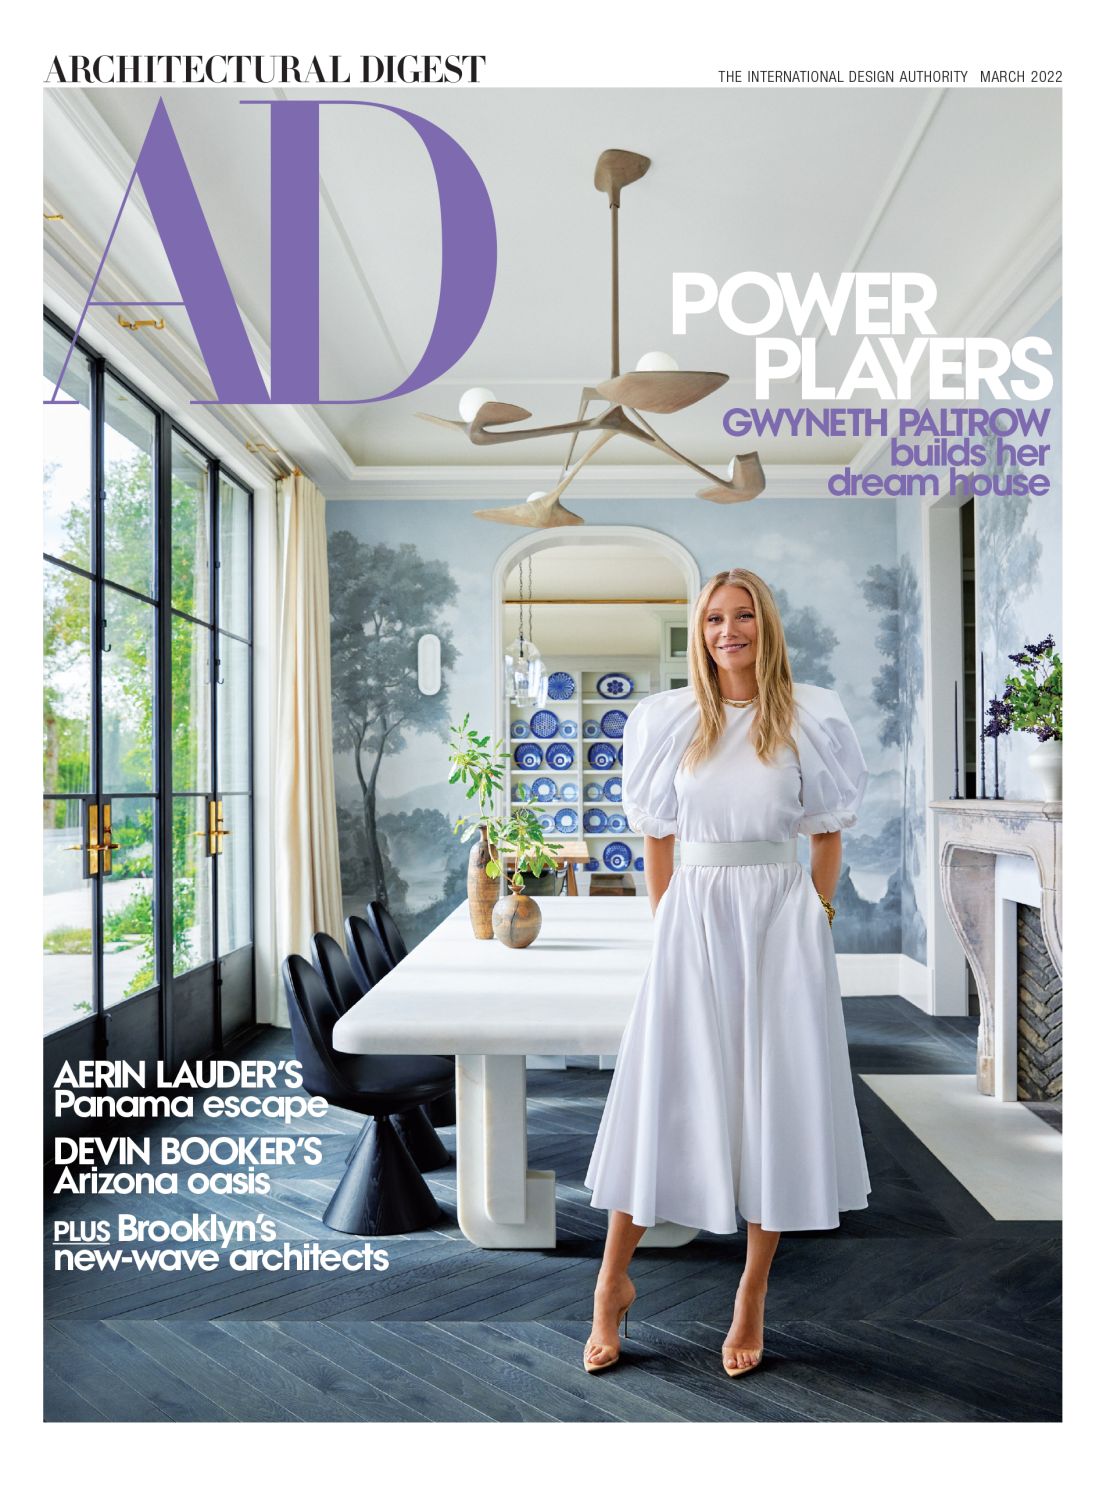 The March issue of Architectural Digest featuring Gwyneth Paltrow.